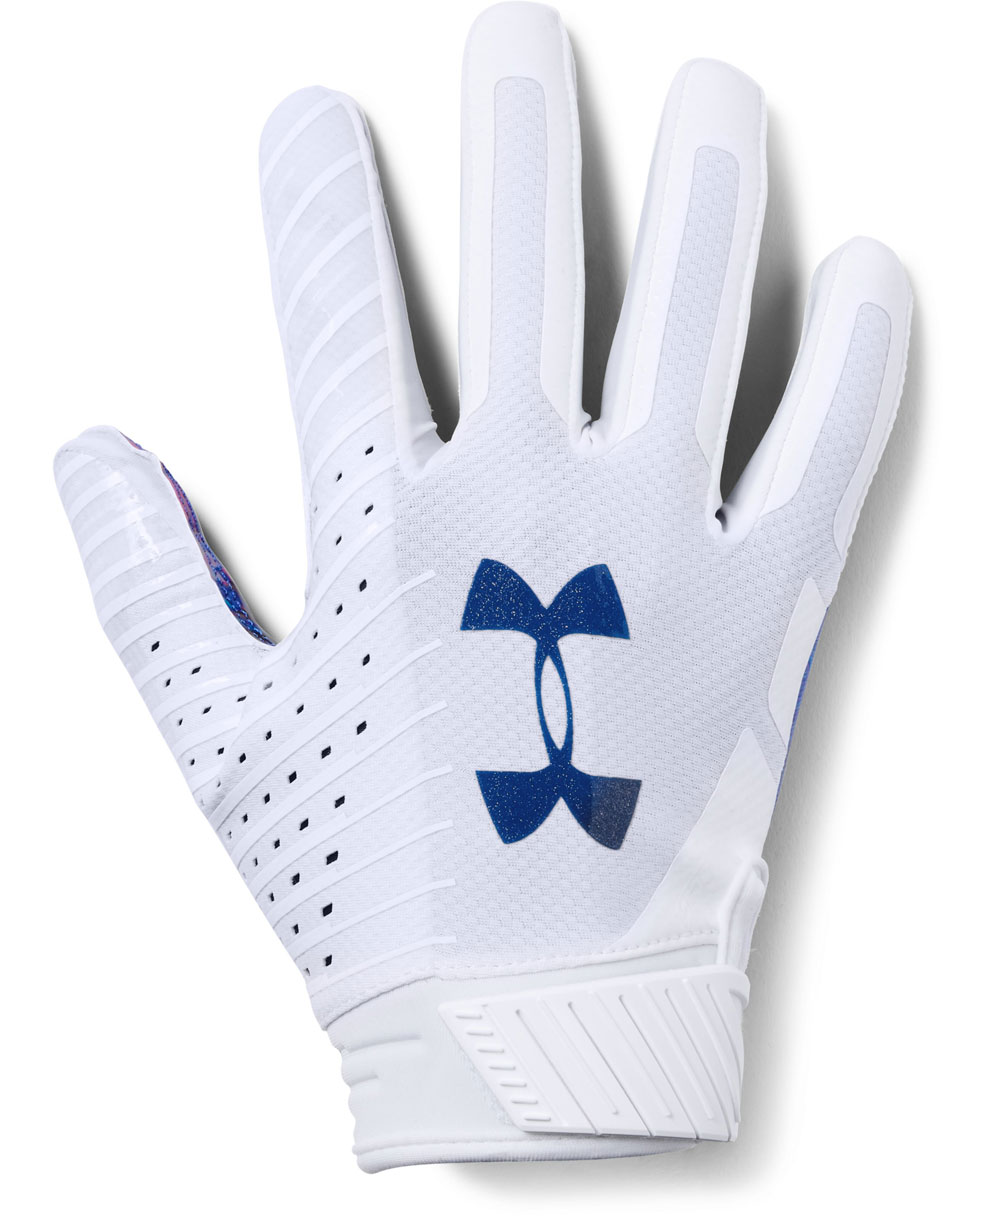 Under Armour Receiver Gloves Size Chart